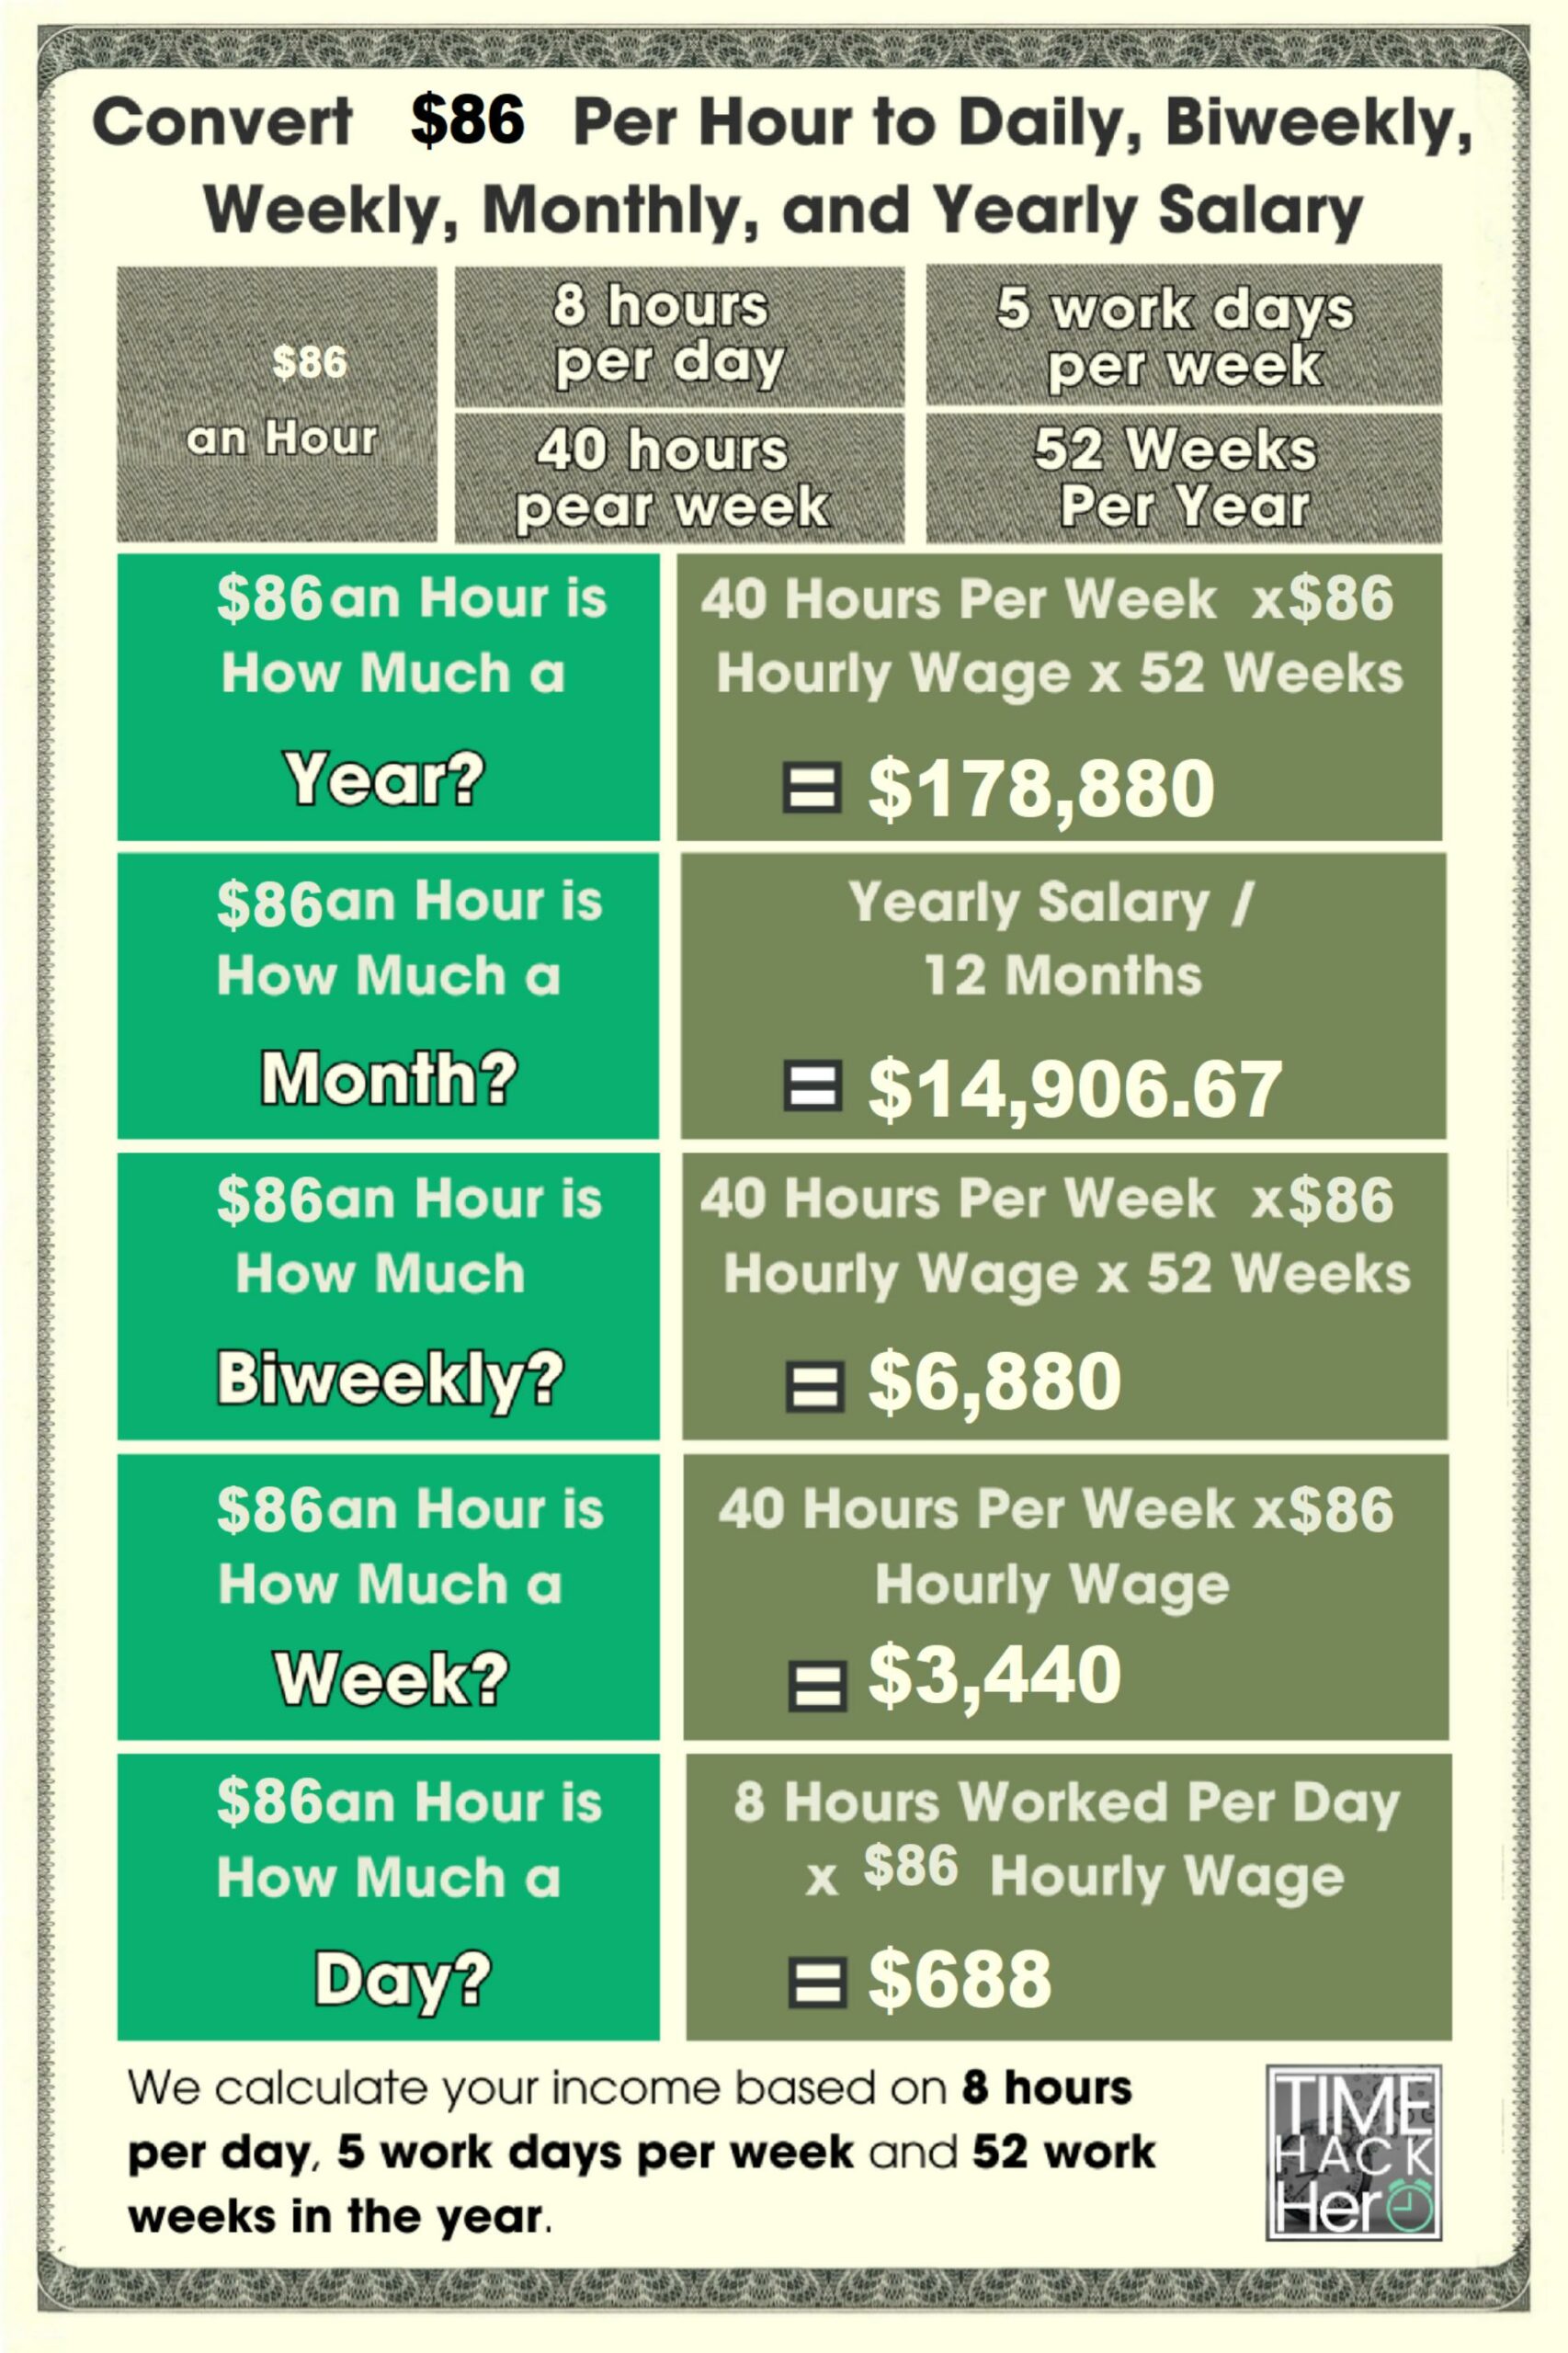 Convert $86 Per Hour to Weekly, Monthly, and Yearly Salary